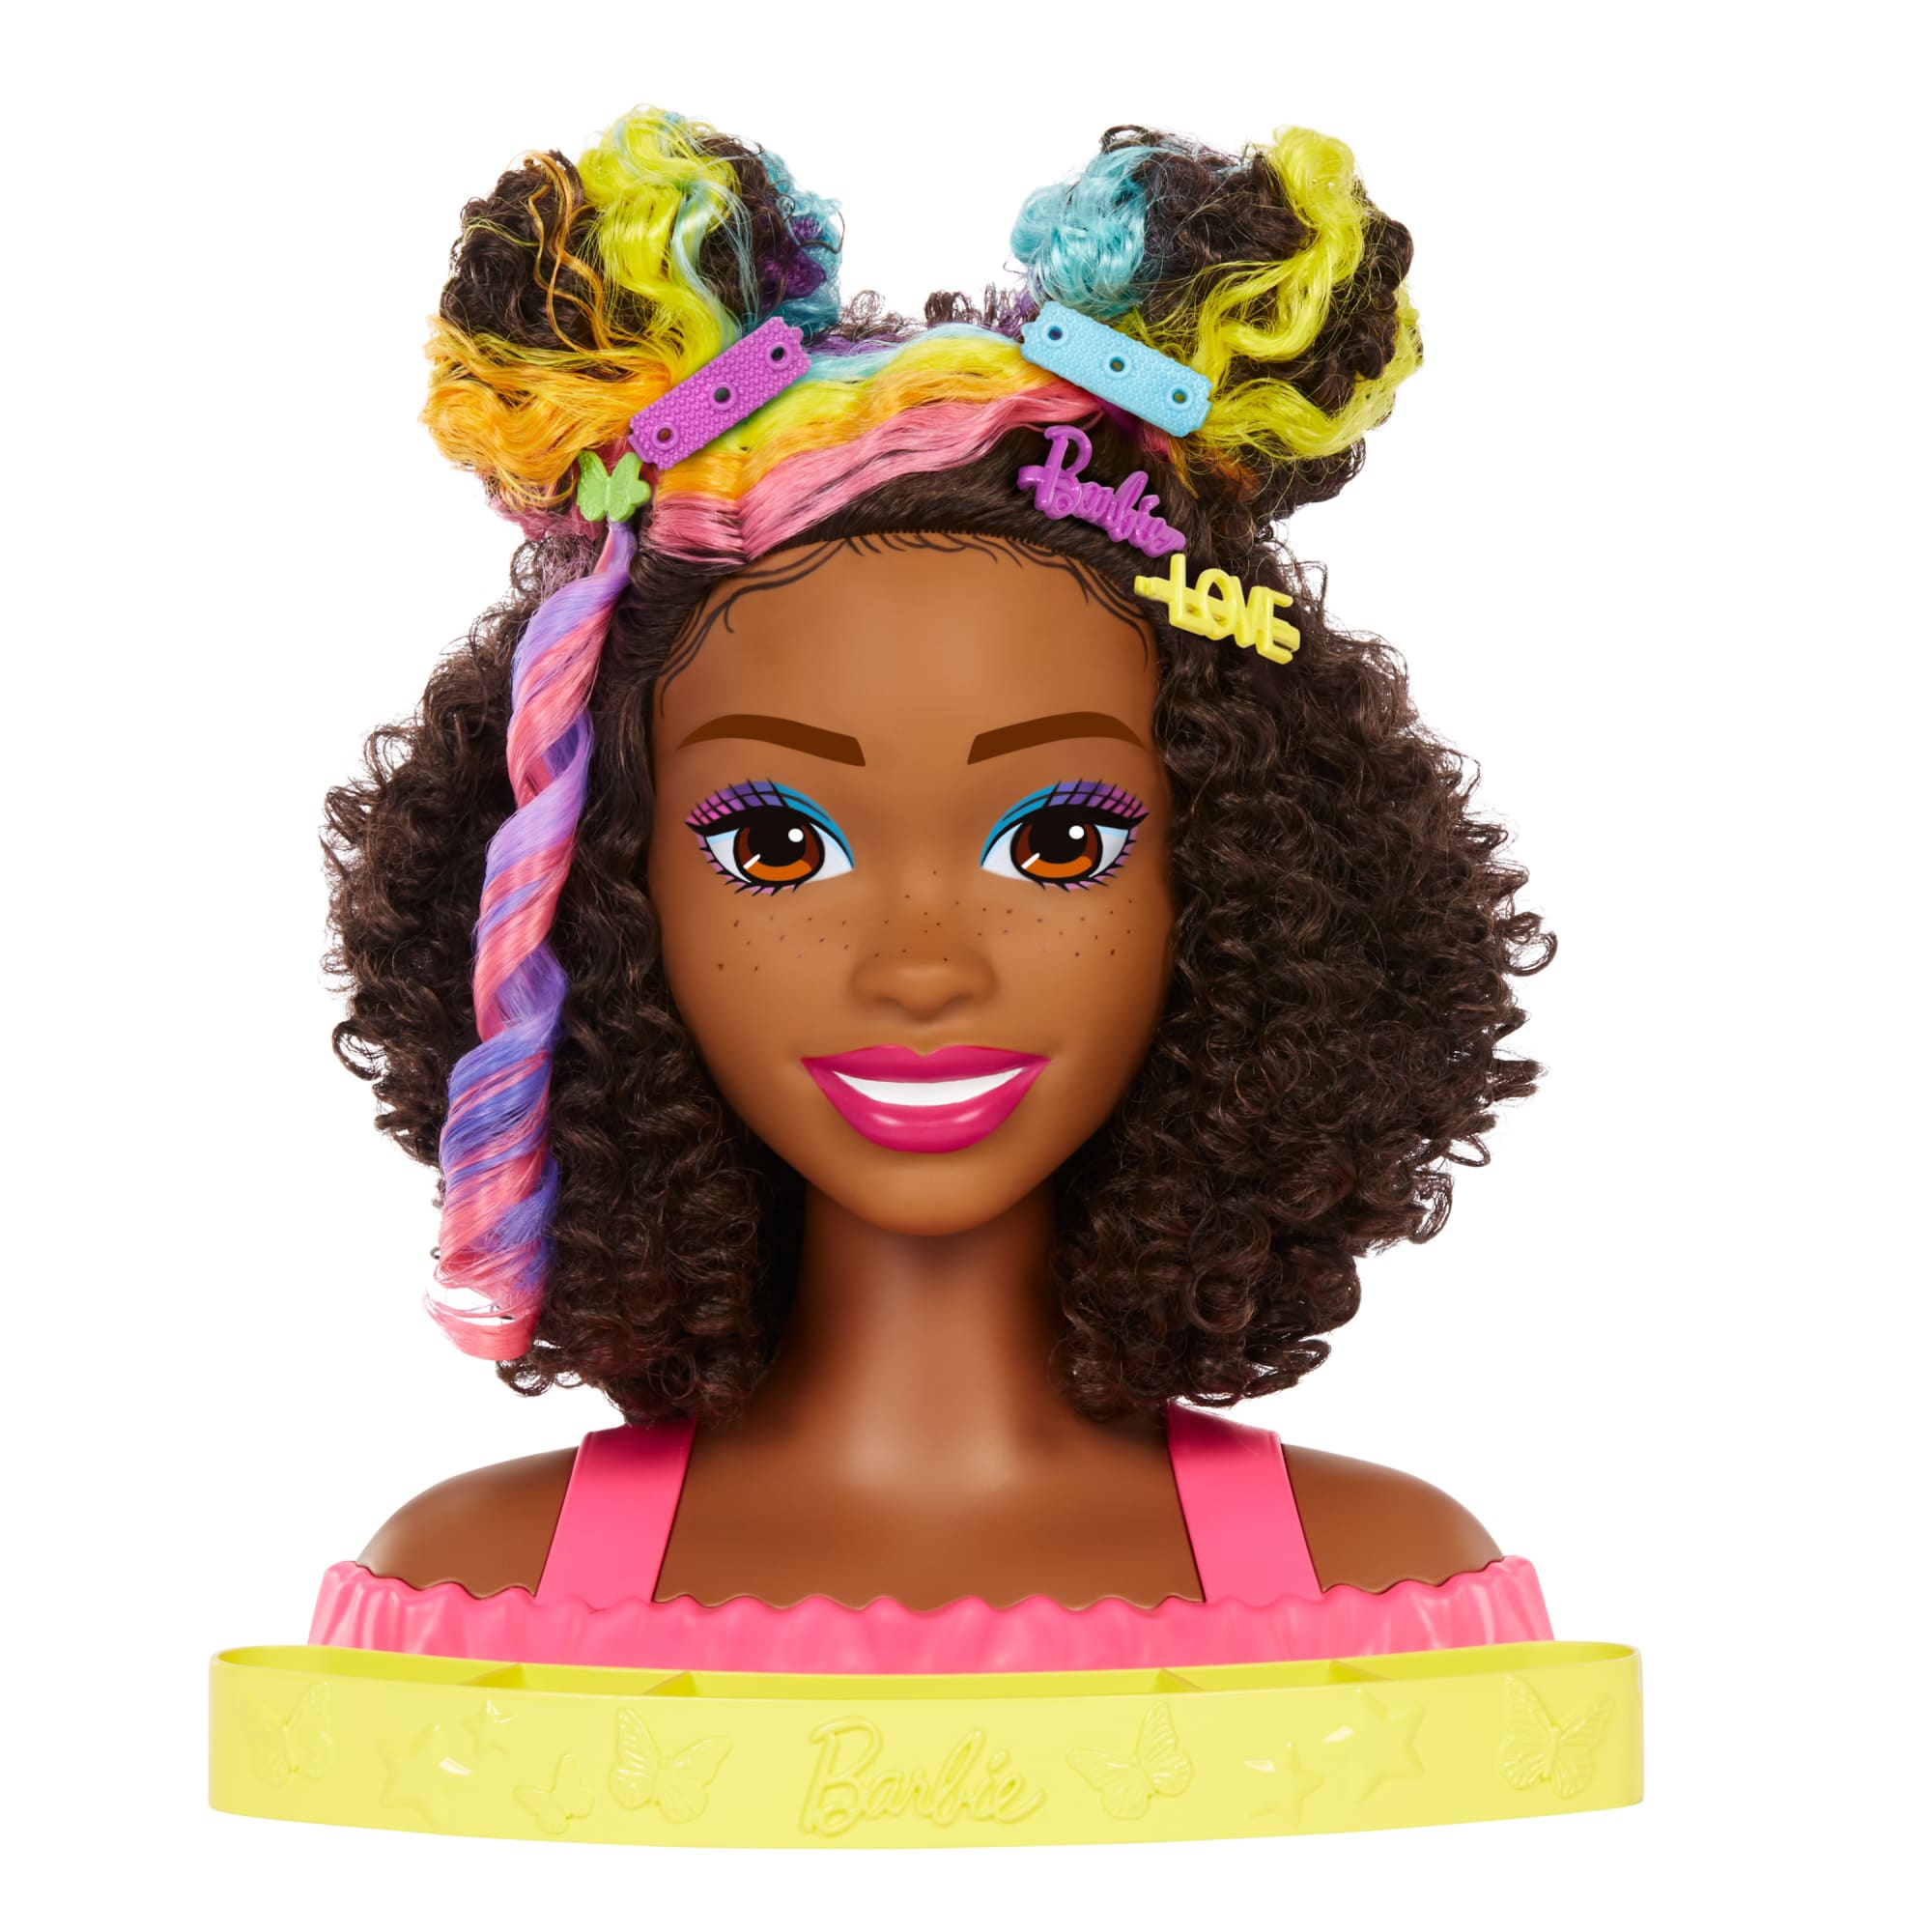 Barbie Deluxe Styling Head, Curly Rainbow Hair